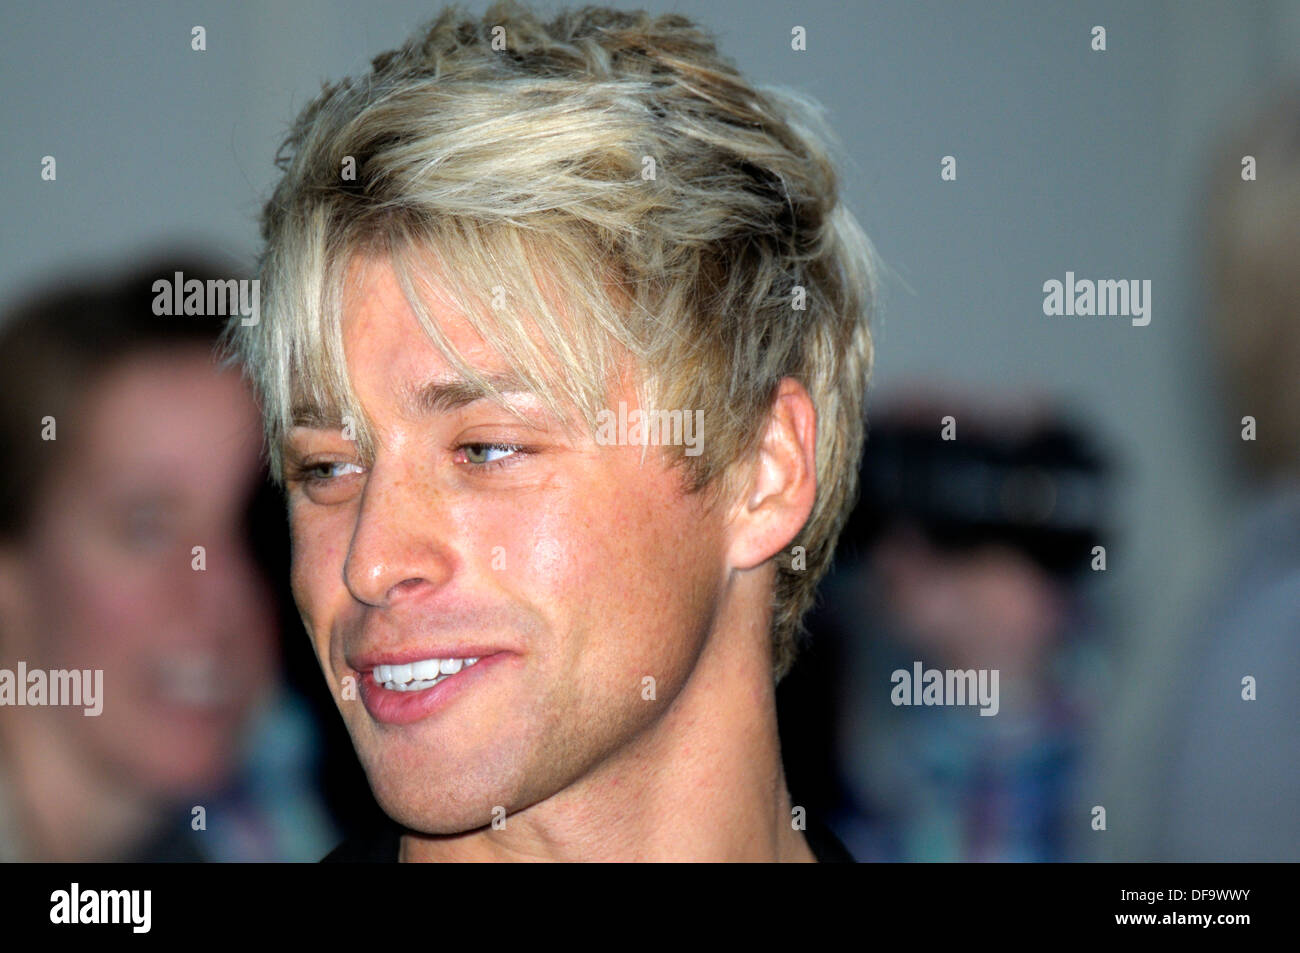 Mitch Hewer at the Film Premiere of 'Filth', London, 30th September 2013. Stock Photo